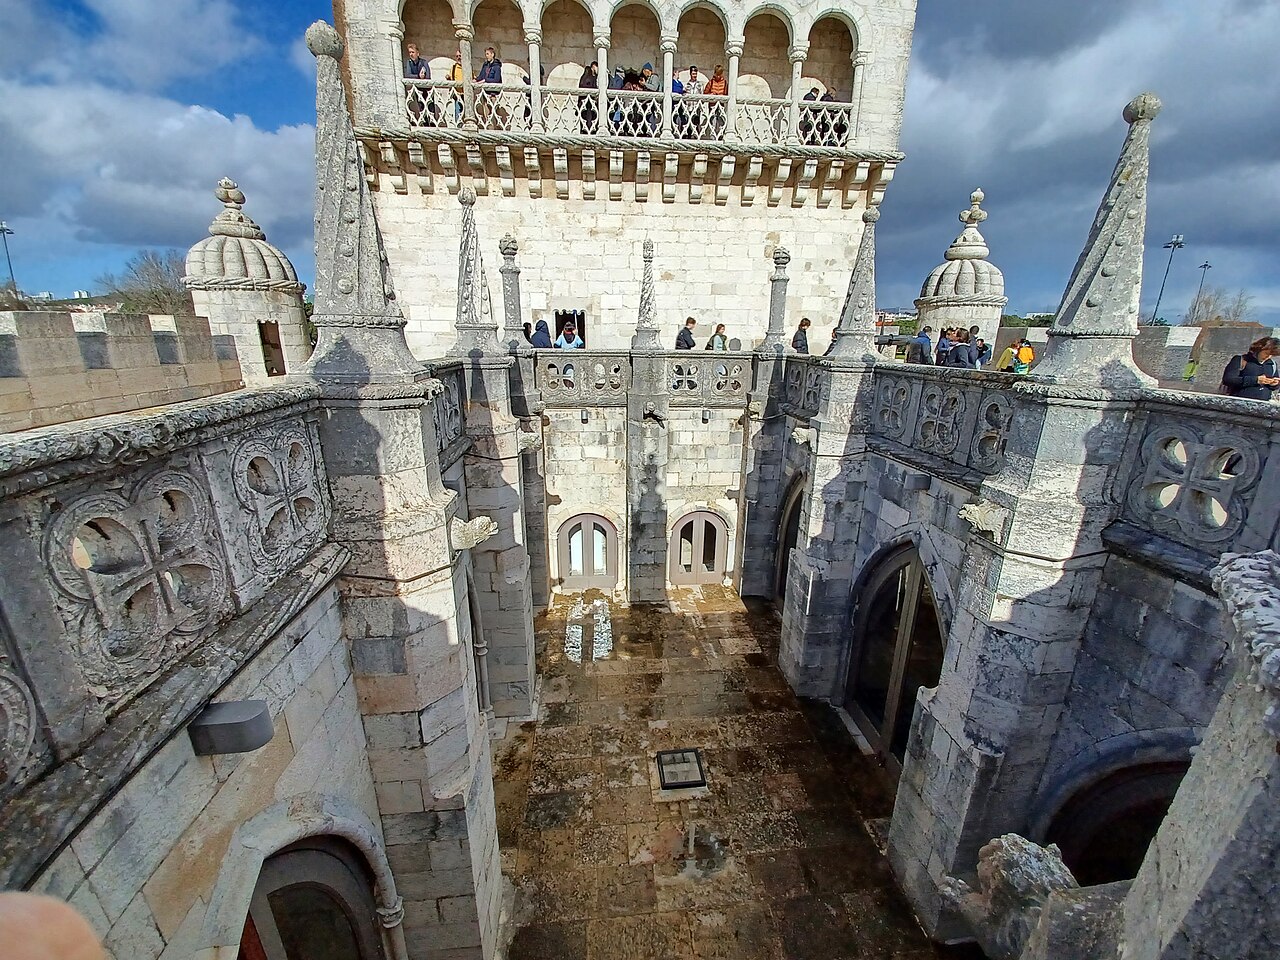 The tower, situated on the northern bank of the Tagus River, is an architectural masterpiece known for its exquisitely rich exterior, featuring sculpted balconies and limestone ornaments. The influence of Moorish architecture is evident in the delicate decorations, arched windows, and ribbed cupolas of the watchtowers.